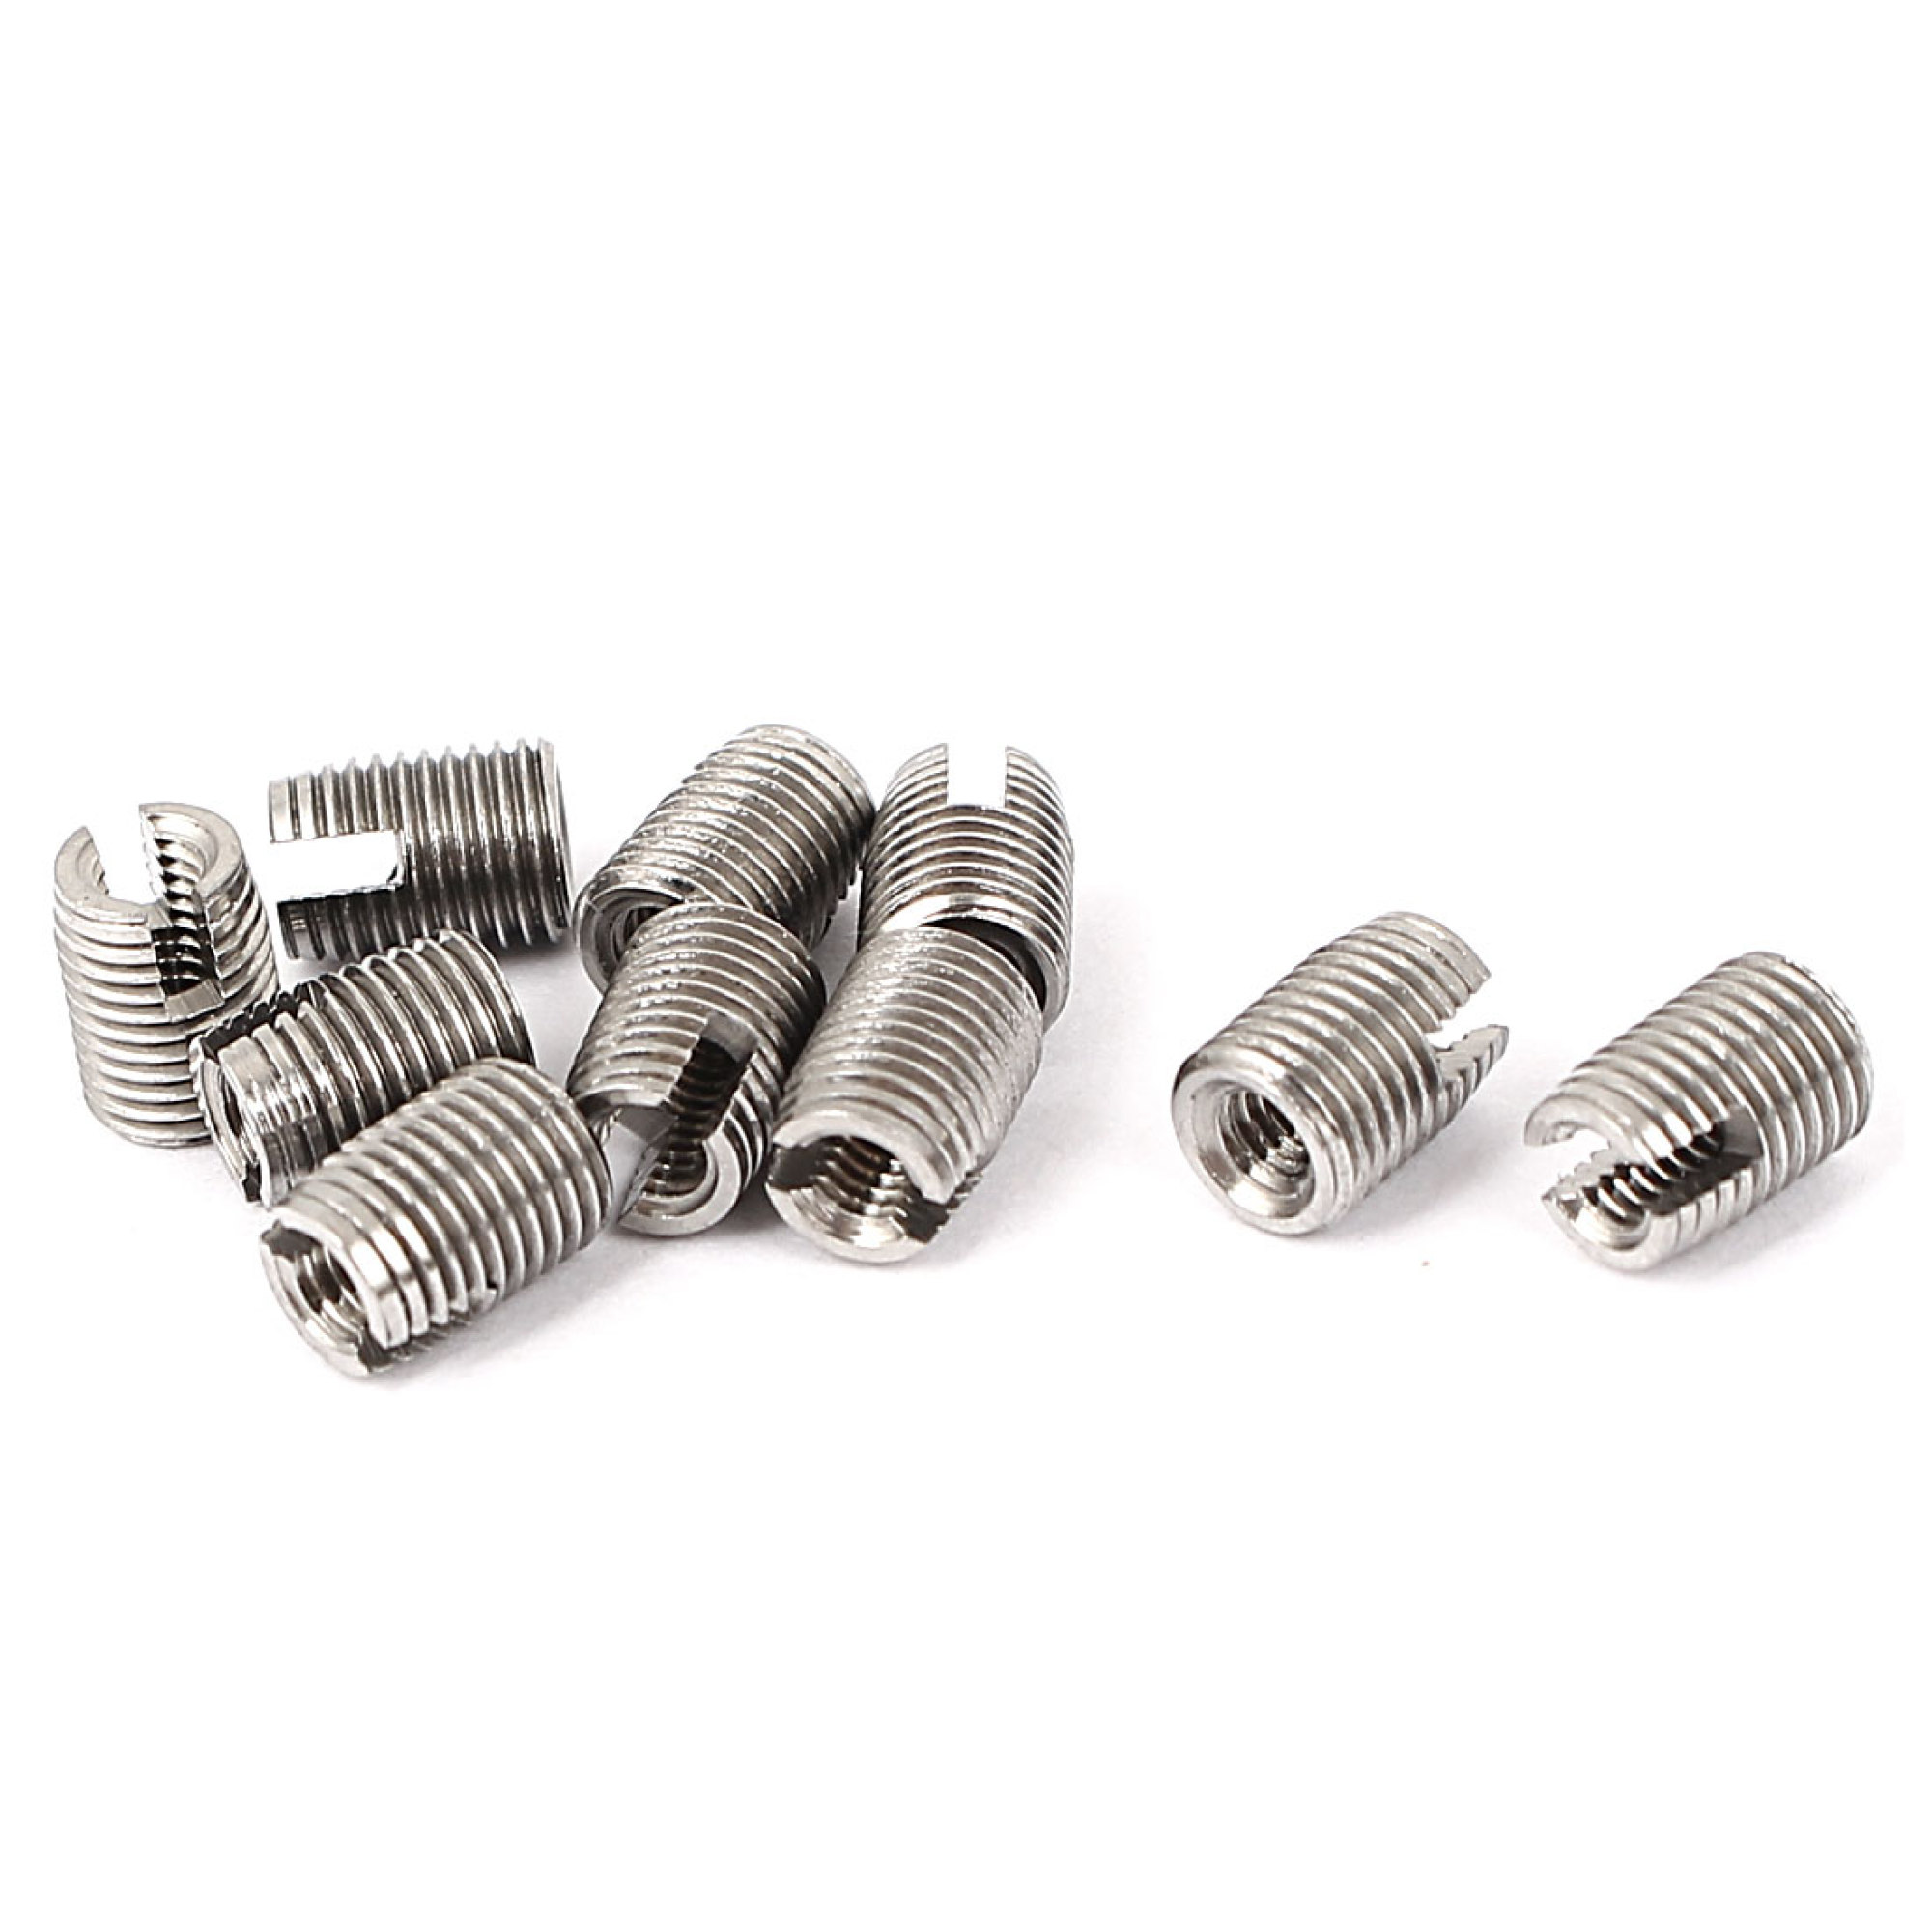 M4.5xM2.5 Stainless Steel Self Tapping Threaded Insert 10Pcs